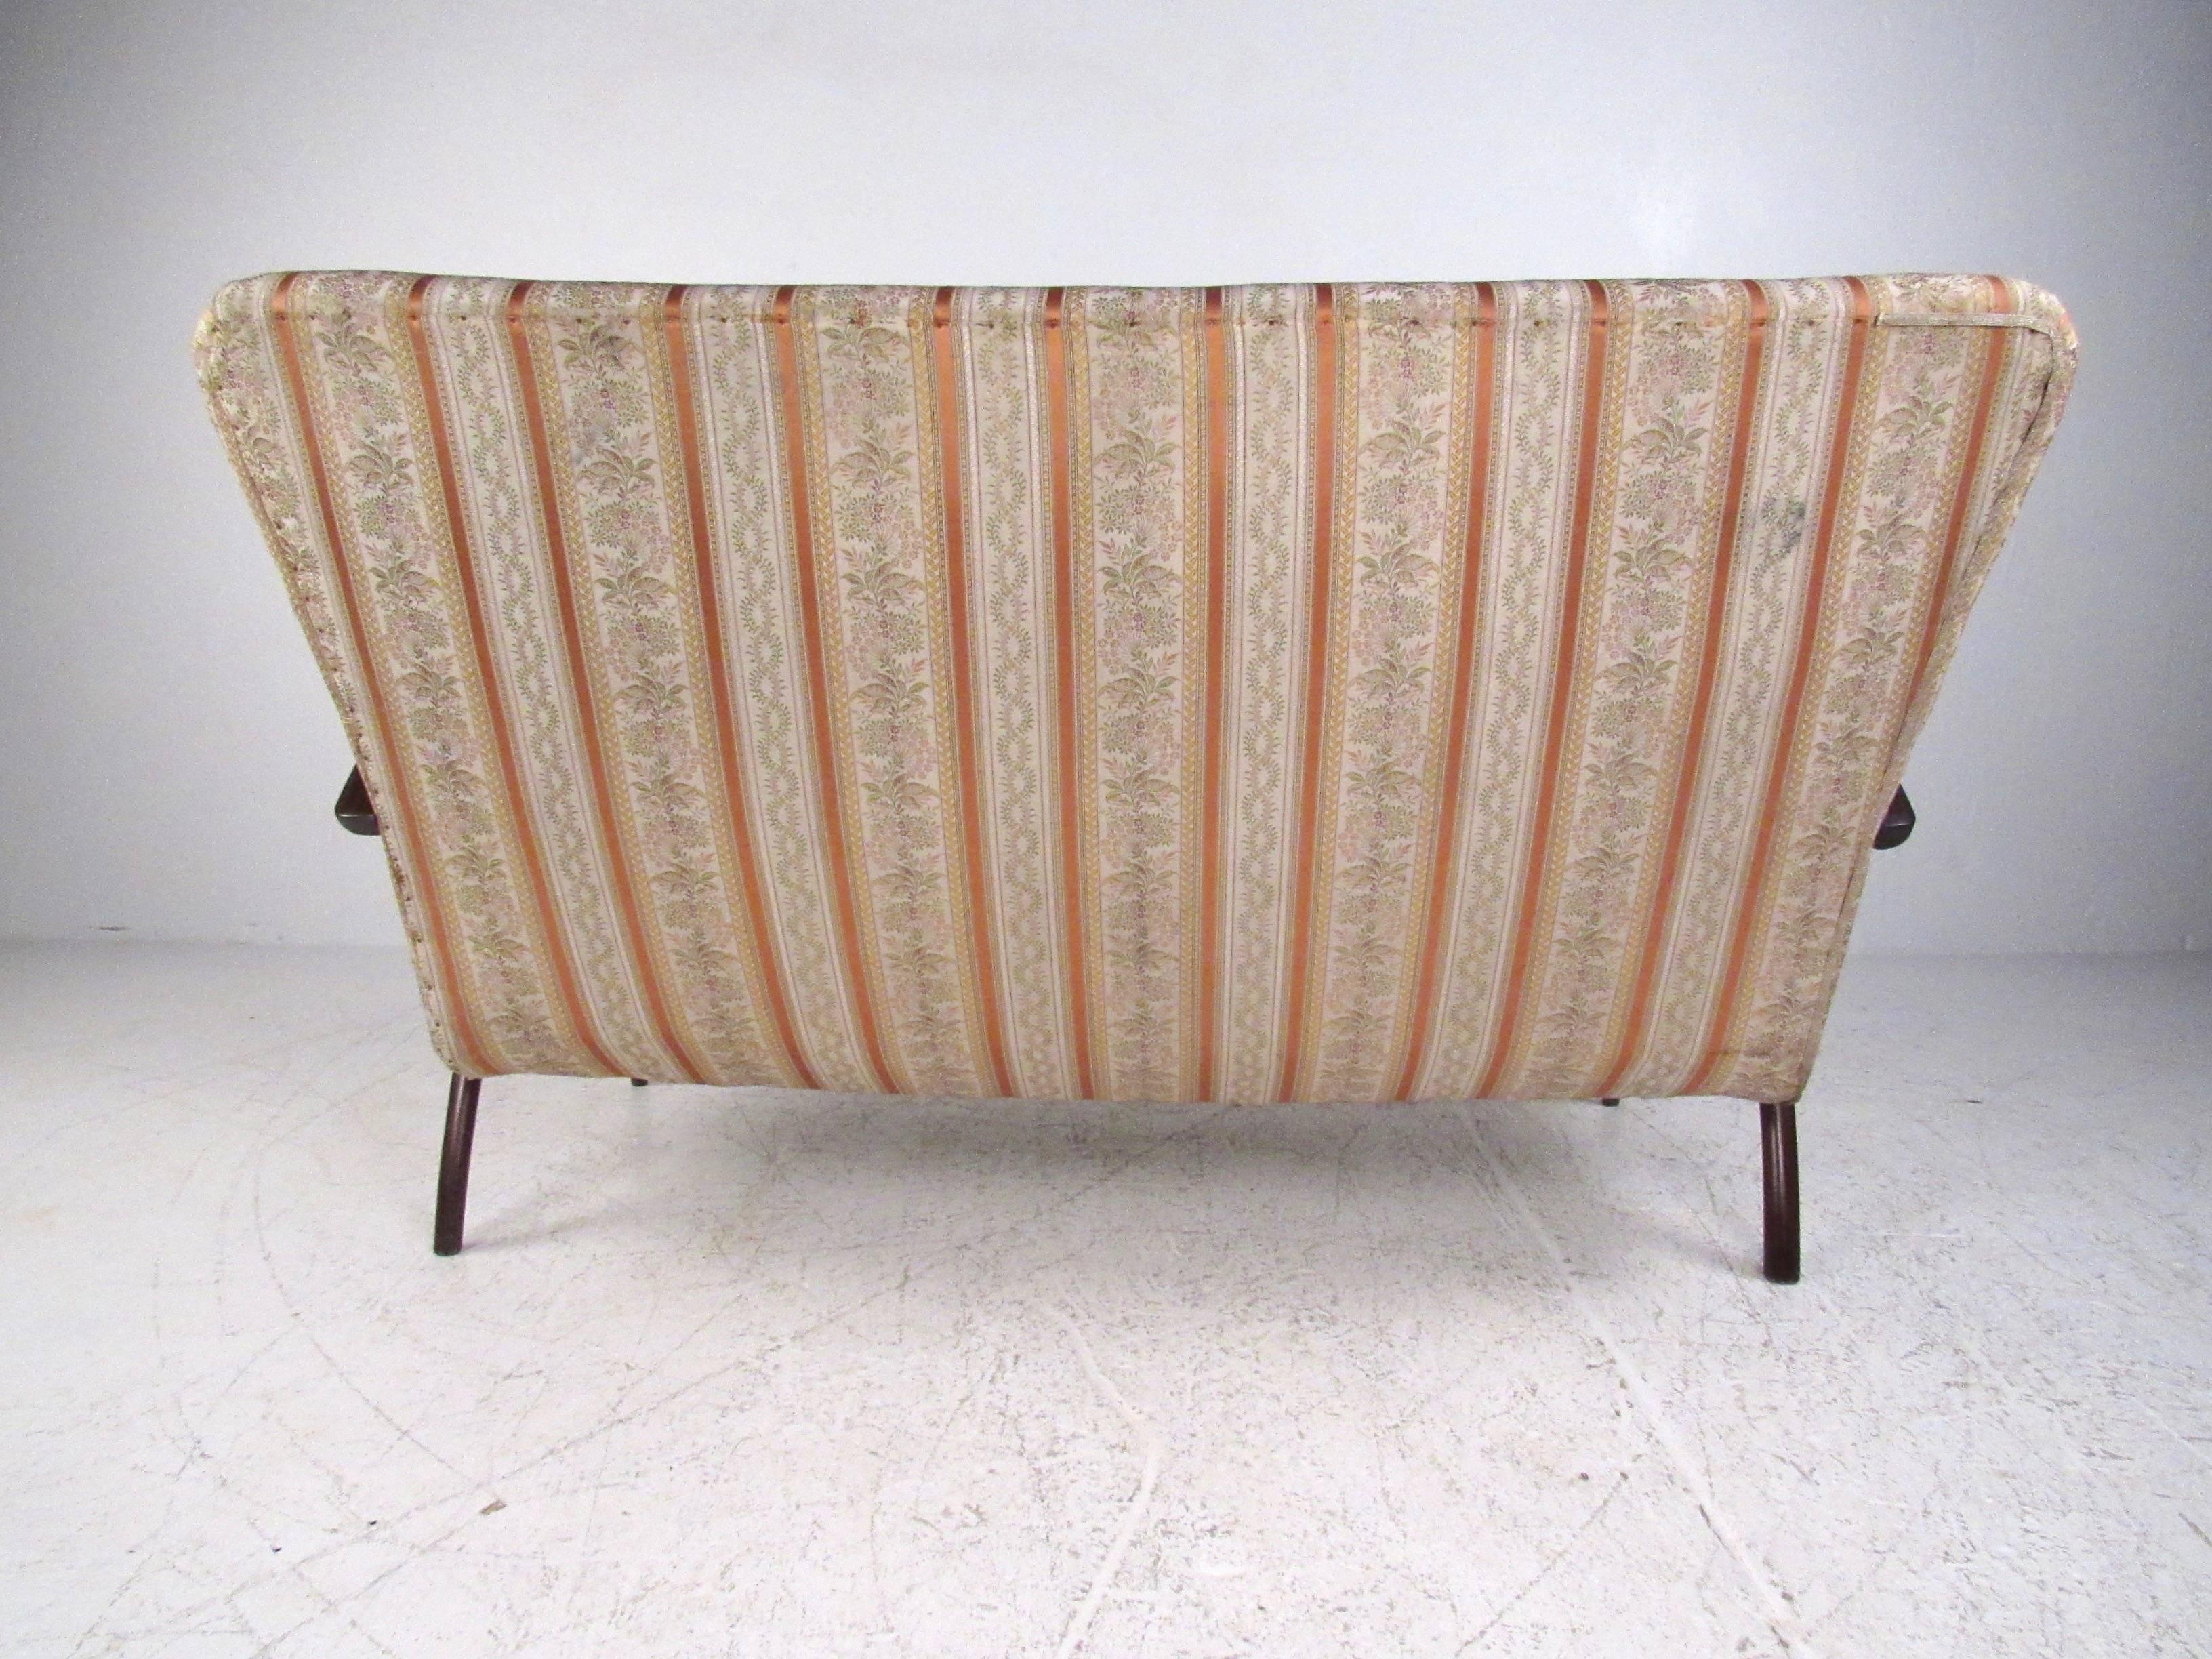 Italian Modern Two Seat Sofa, c. 1950s In Good Condition For Sale In Brooklyn, NY